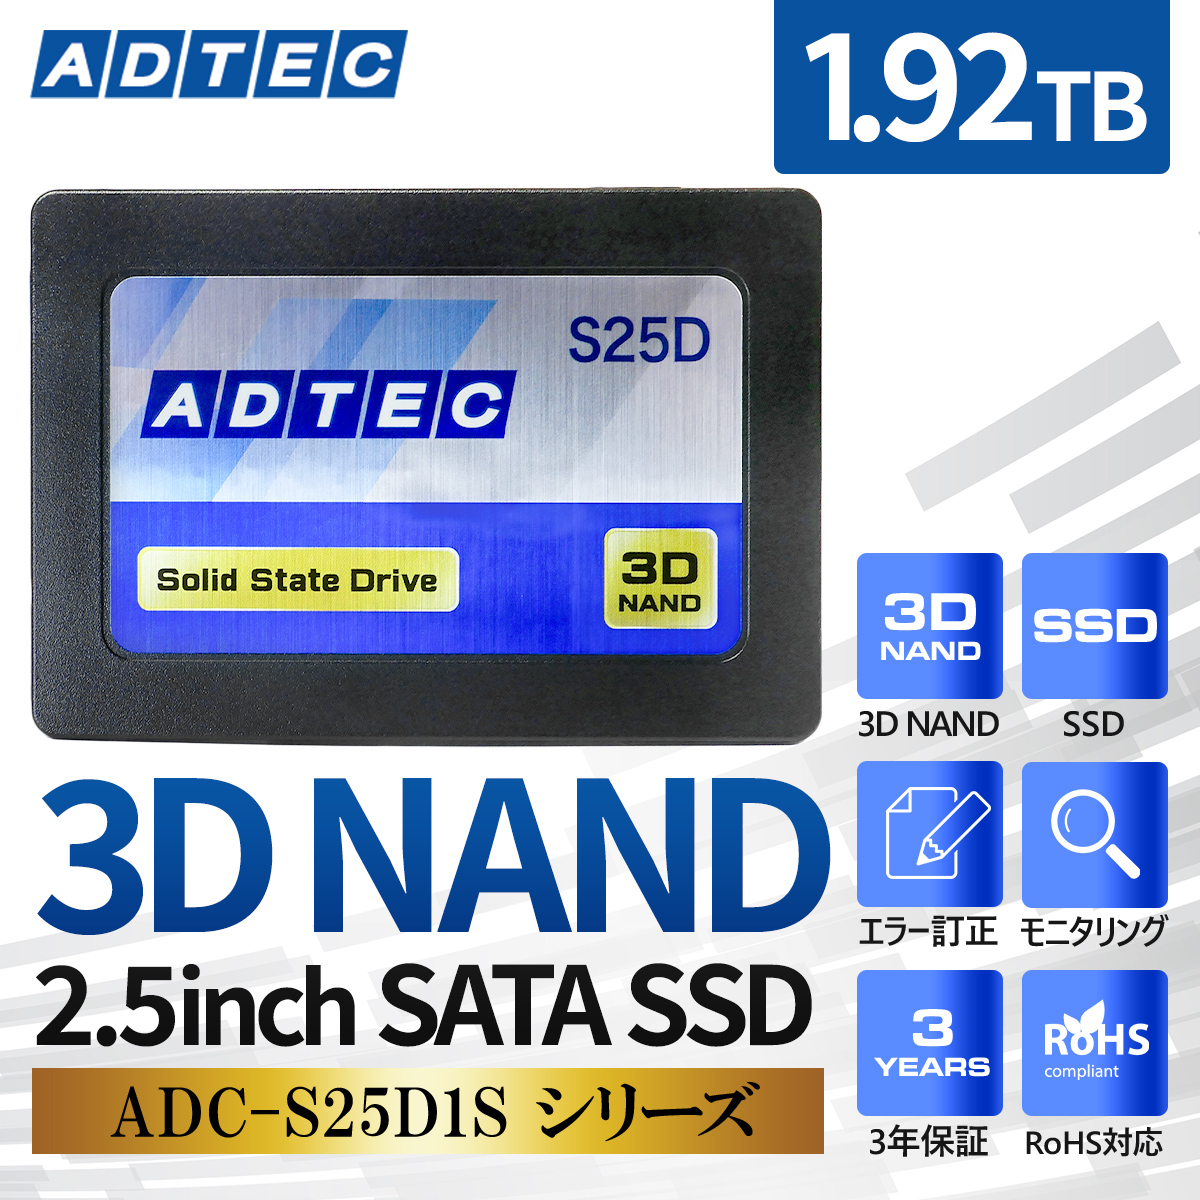 3D NAND 2.5inch SATA SSD ADC-S25D1S シリーズ - 株式会社アドテック